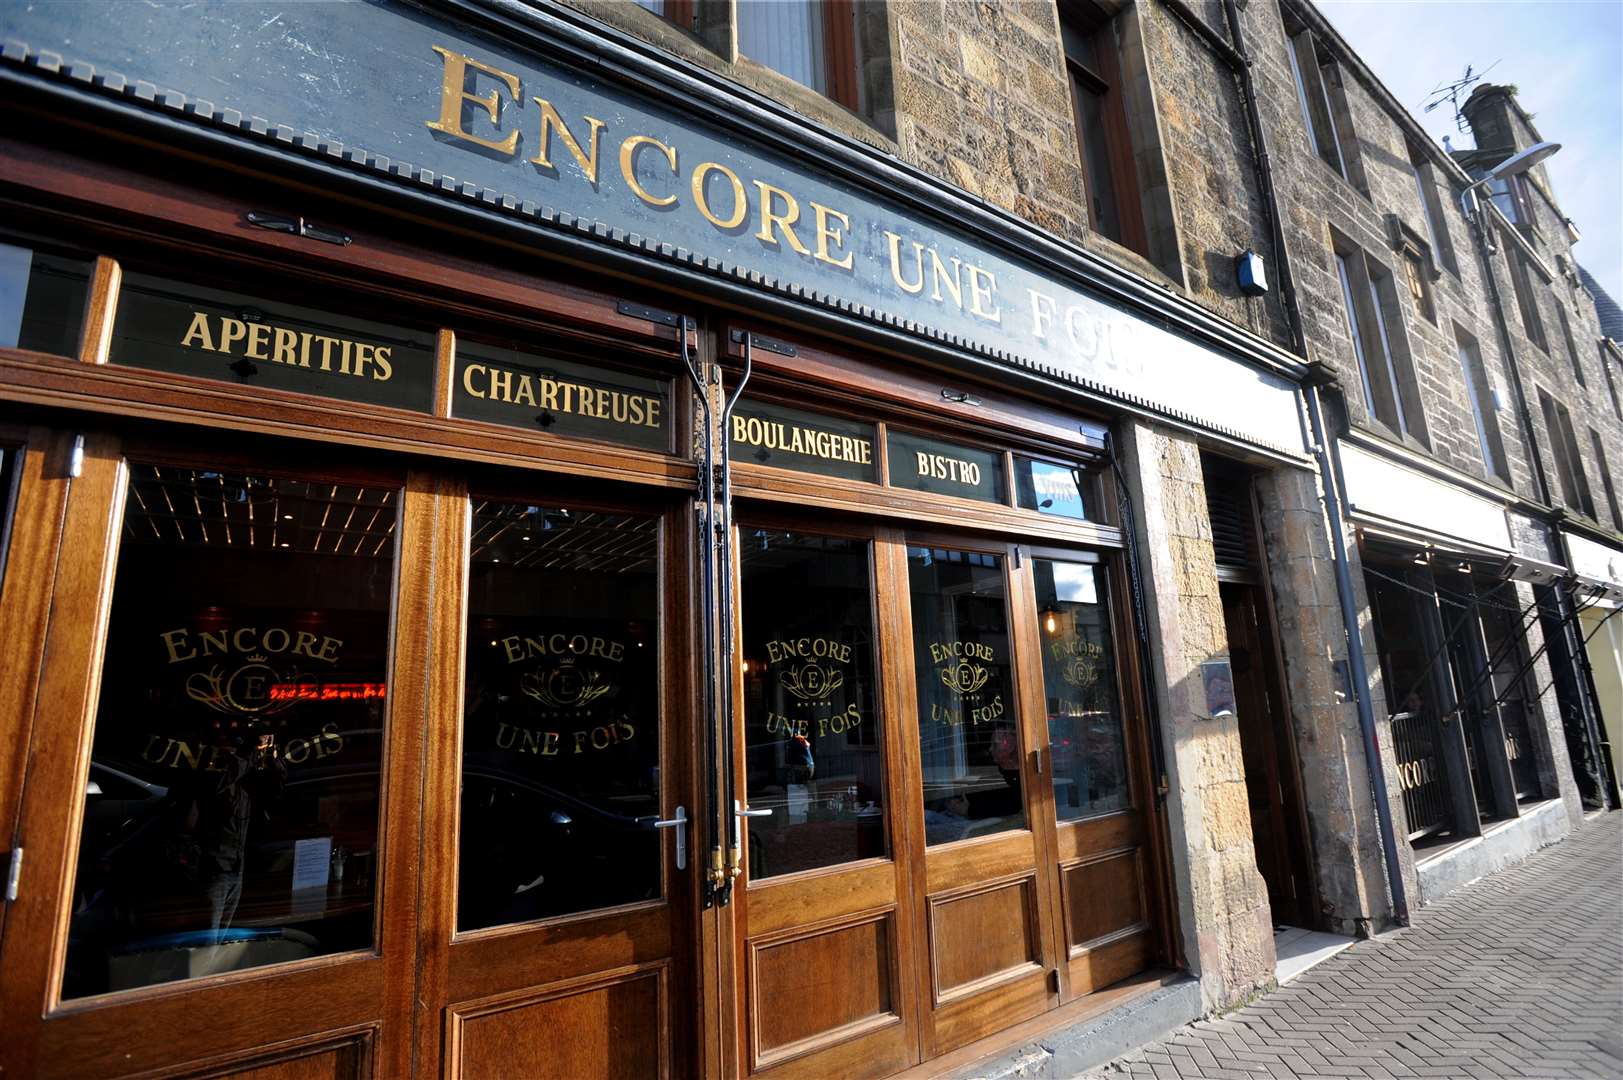 A barman was bitten on the chin at the Encore Une Fois bar restaurant.